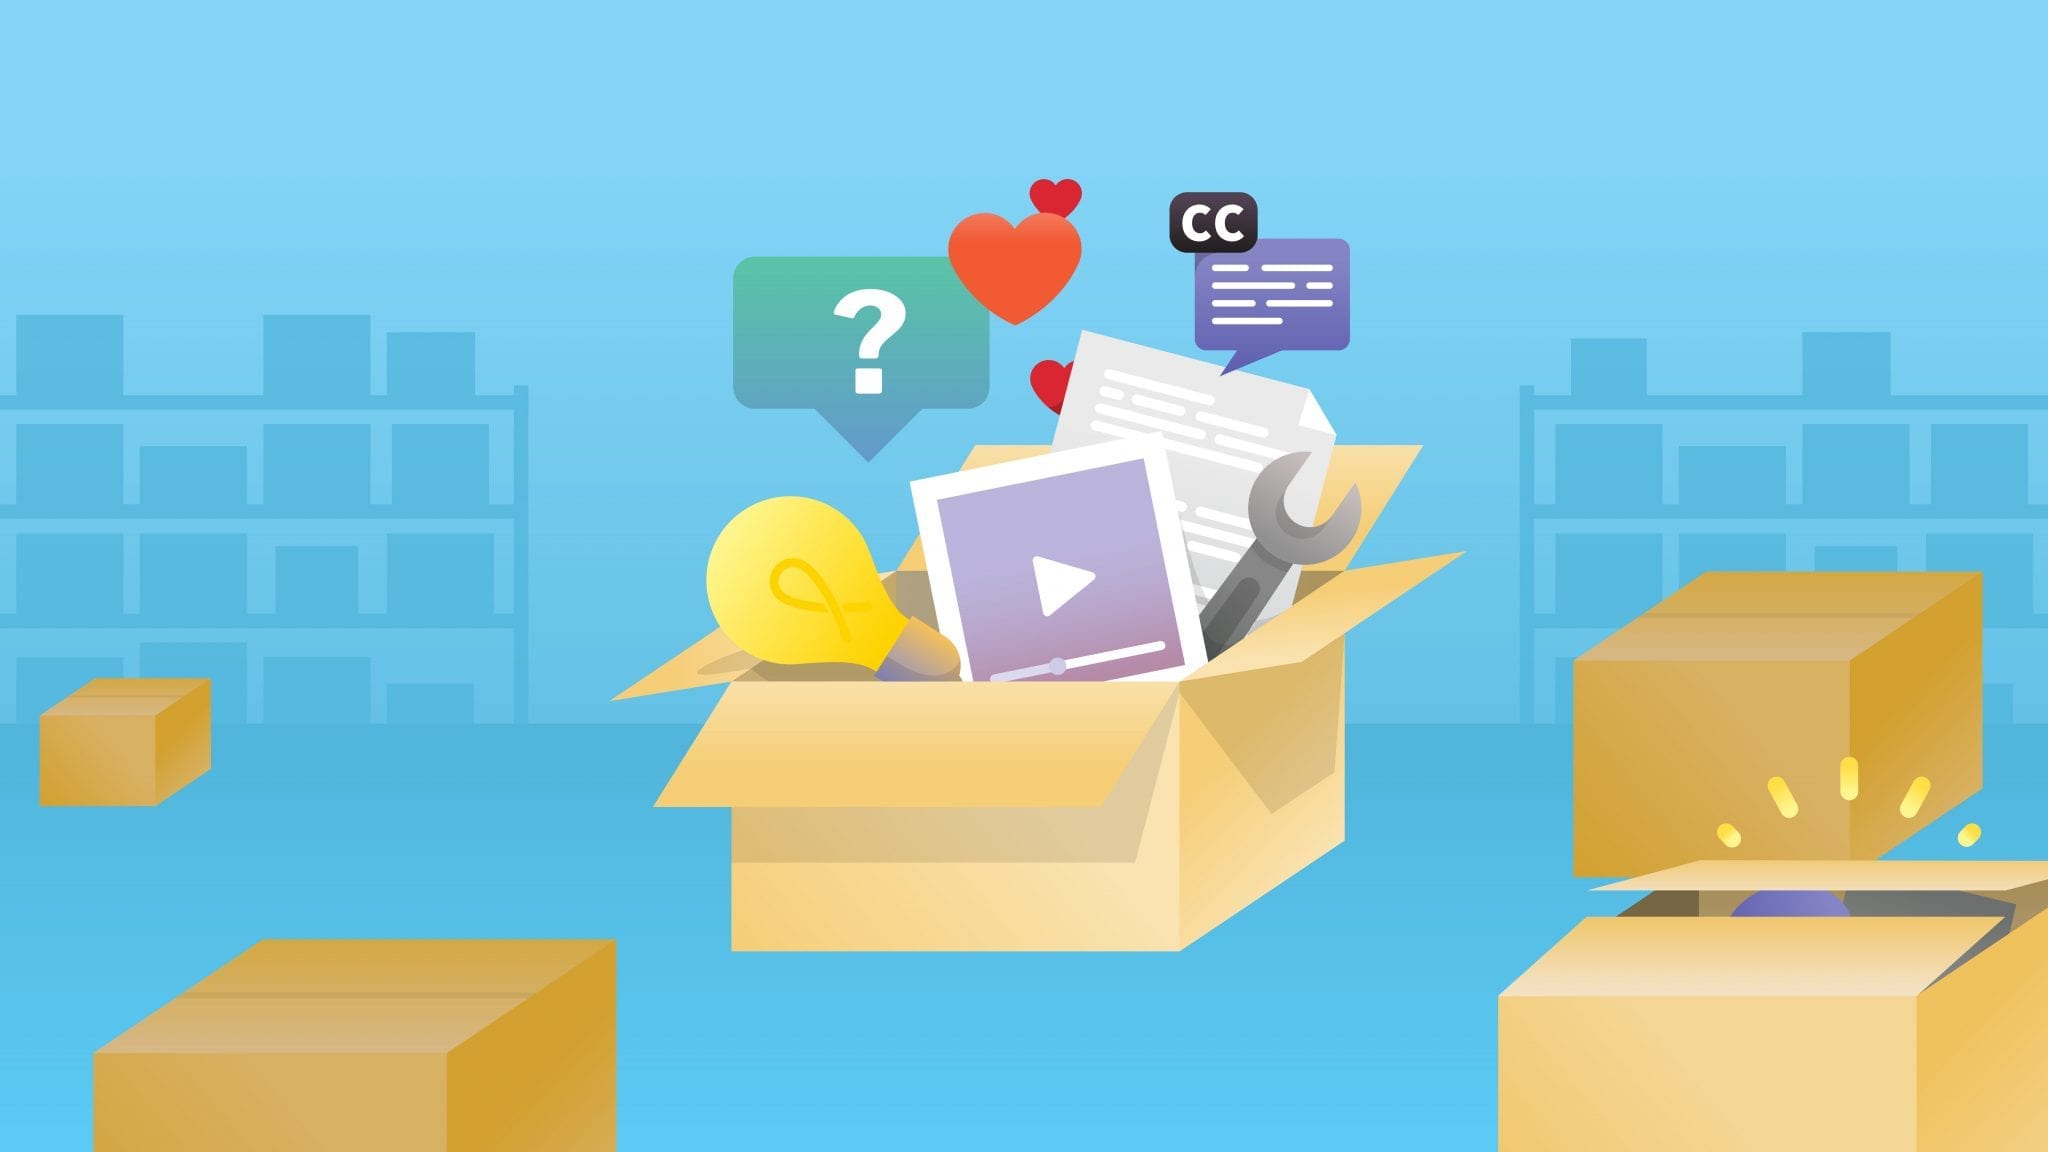 Image of various things stuffed in a cardboard box, including a lightbulb, a heart, a wrench, a transcript and more